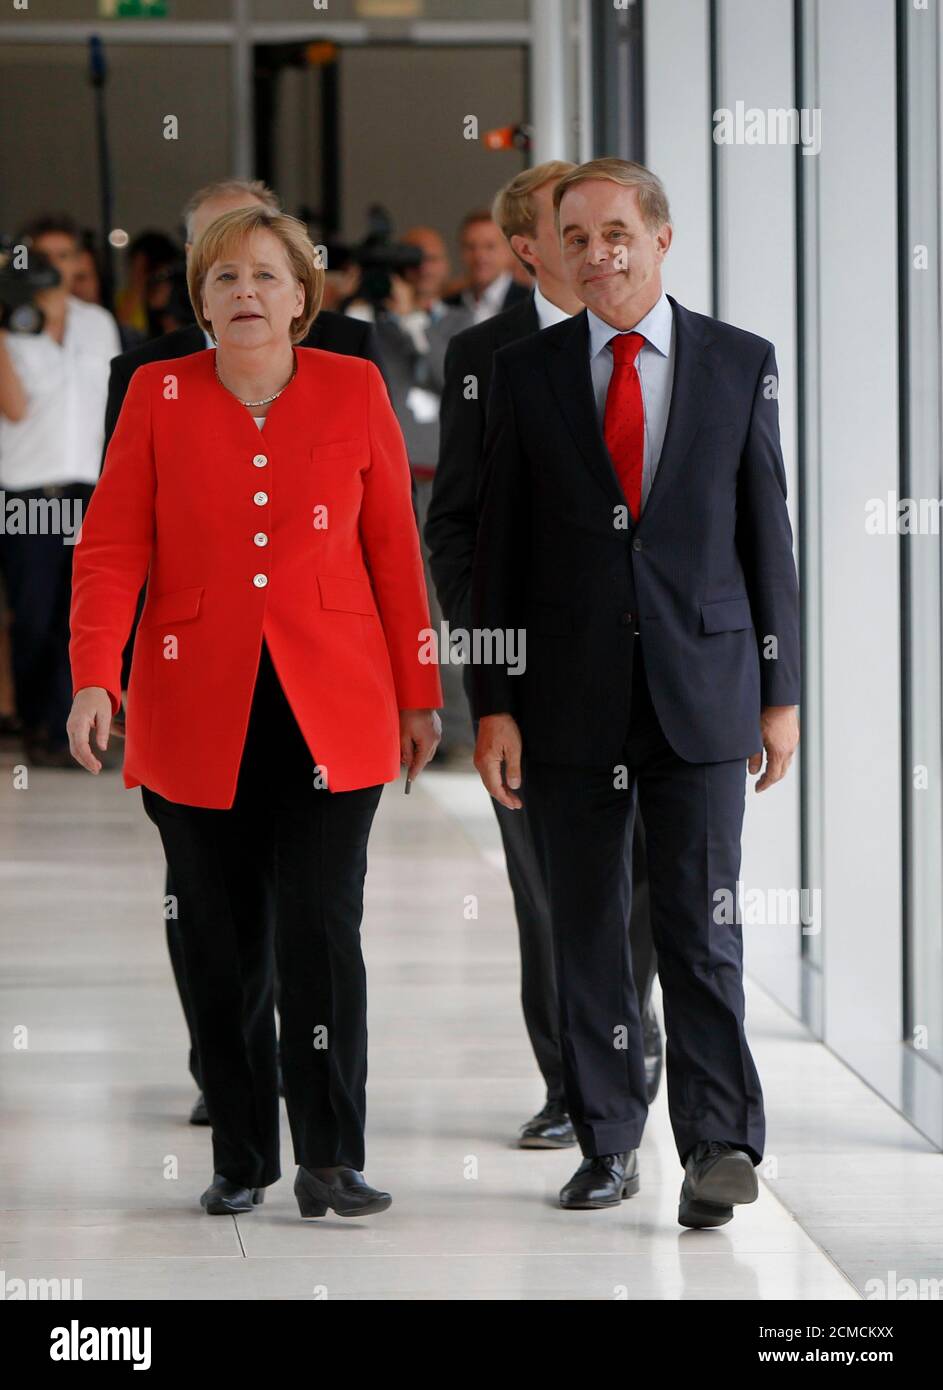 German Chancellor and head of the Christian Democratic Union (CDU) Angela Merkel (L) arrives with Joerg van Essen of the liberal Free Democratic Party (FDP) to join a FDP parliamentary group meeting in Berlin, July 6, 2010. REUTERS/Thomas Peter  (GERMANY - Tags: POLITICS) Stock Photo